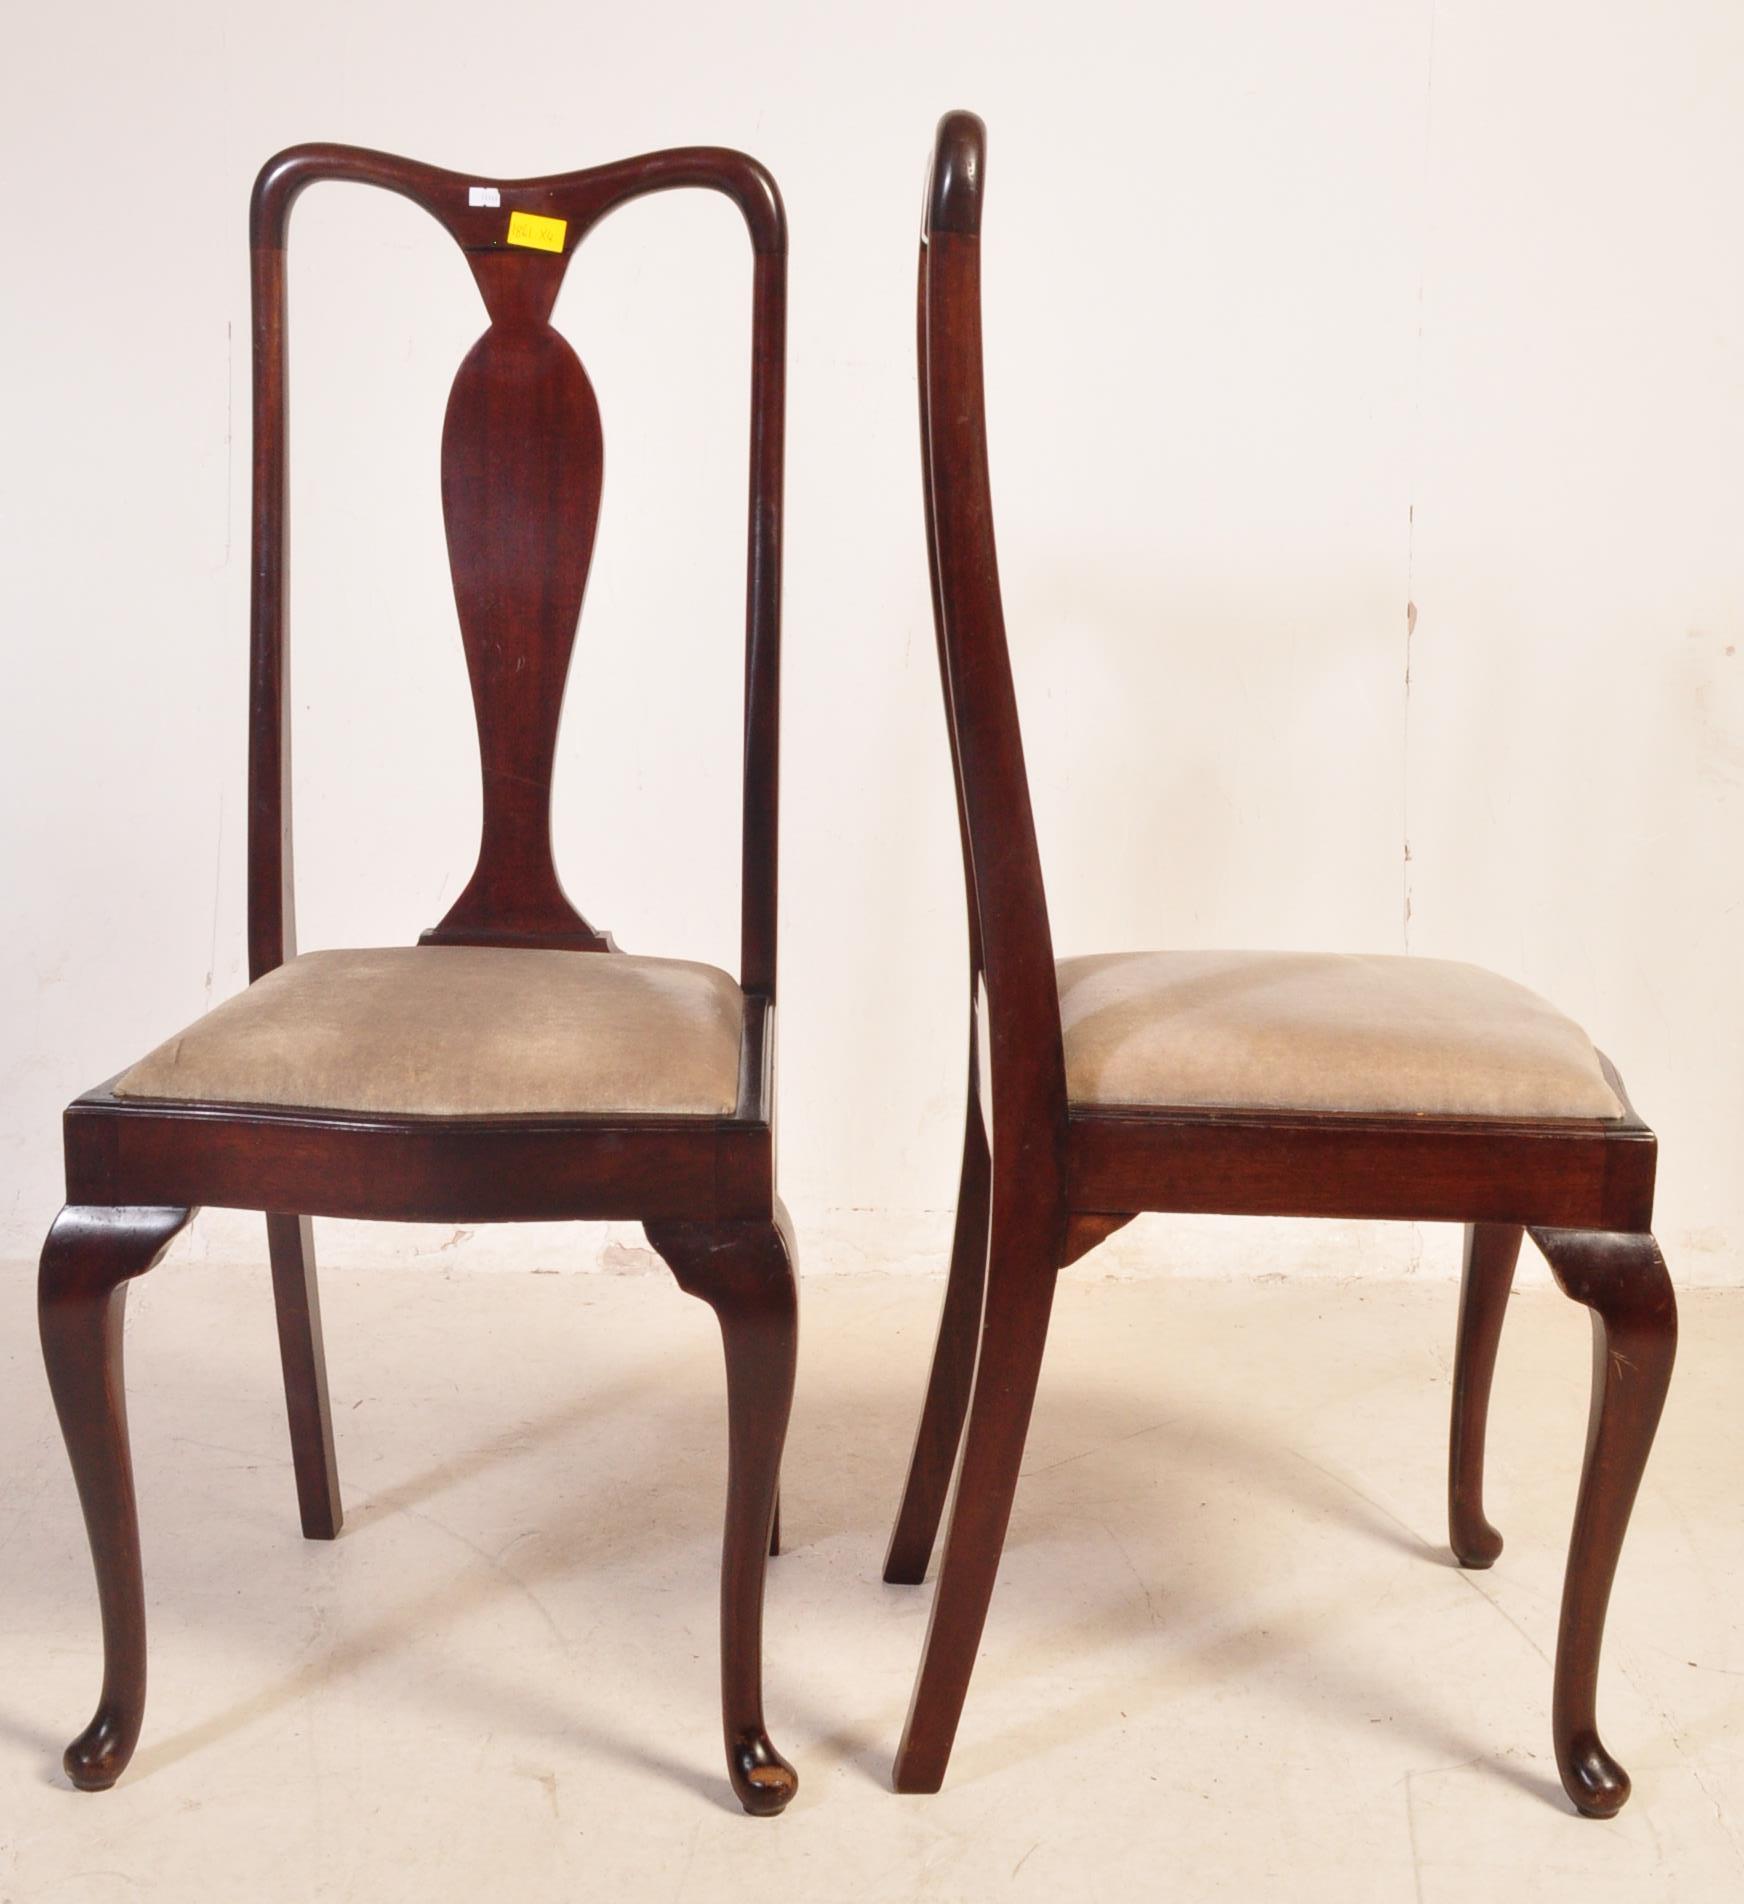 20TH CENTURY QUEEN ANNE REVIVAL AFRICAN MAHOGANY DINING TABLE & CHAIRS - Image 9 of 11